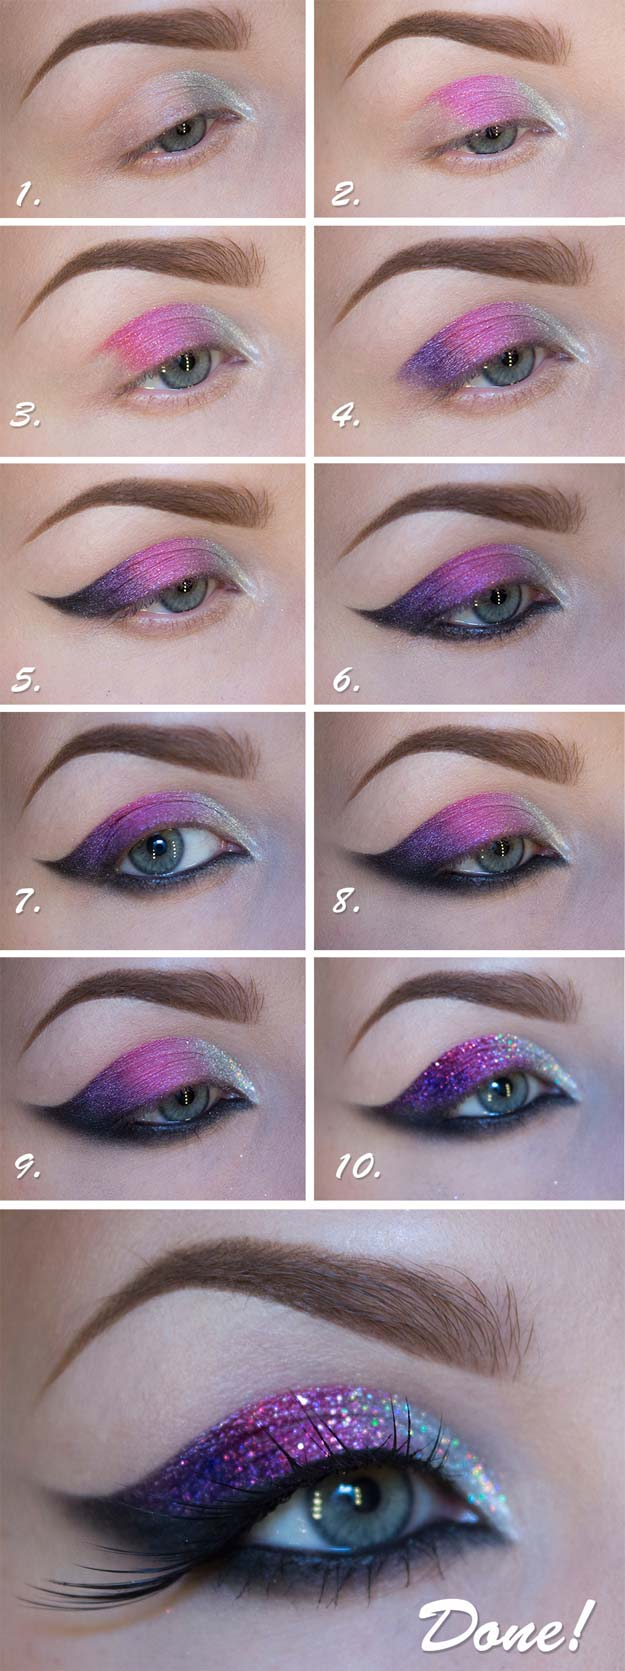 Purple Makeup Brown Eyes 38 Makeup Ideas For Prom The Goddess